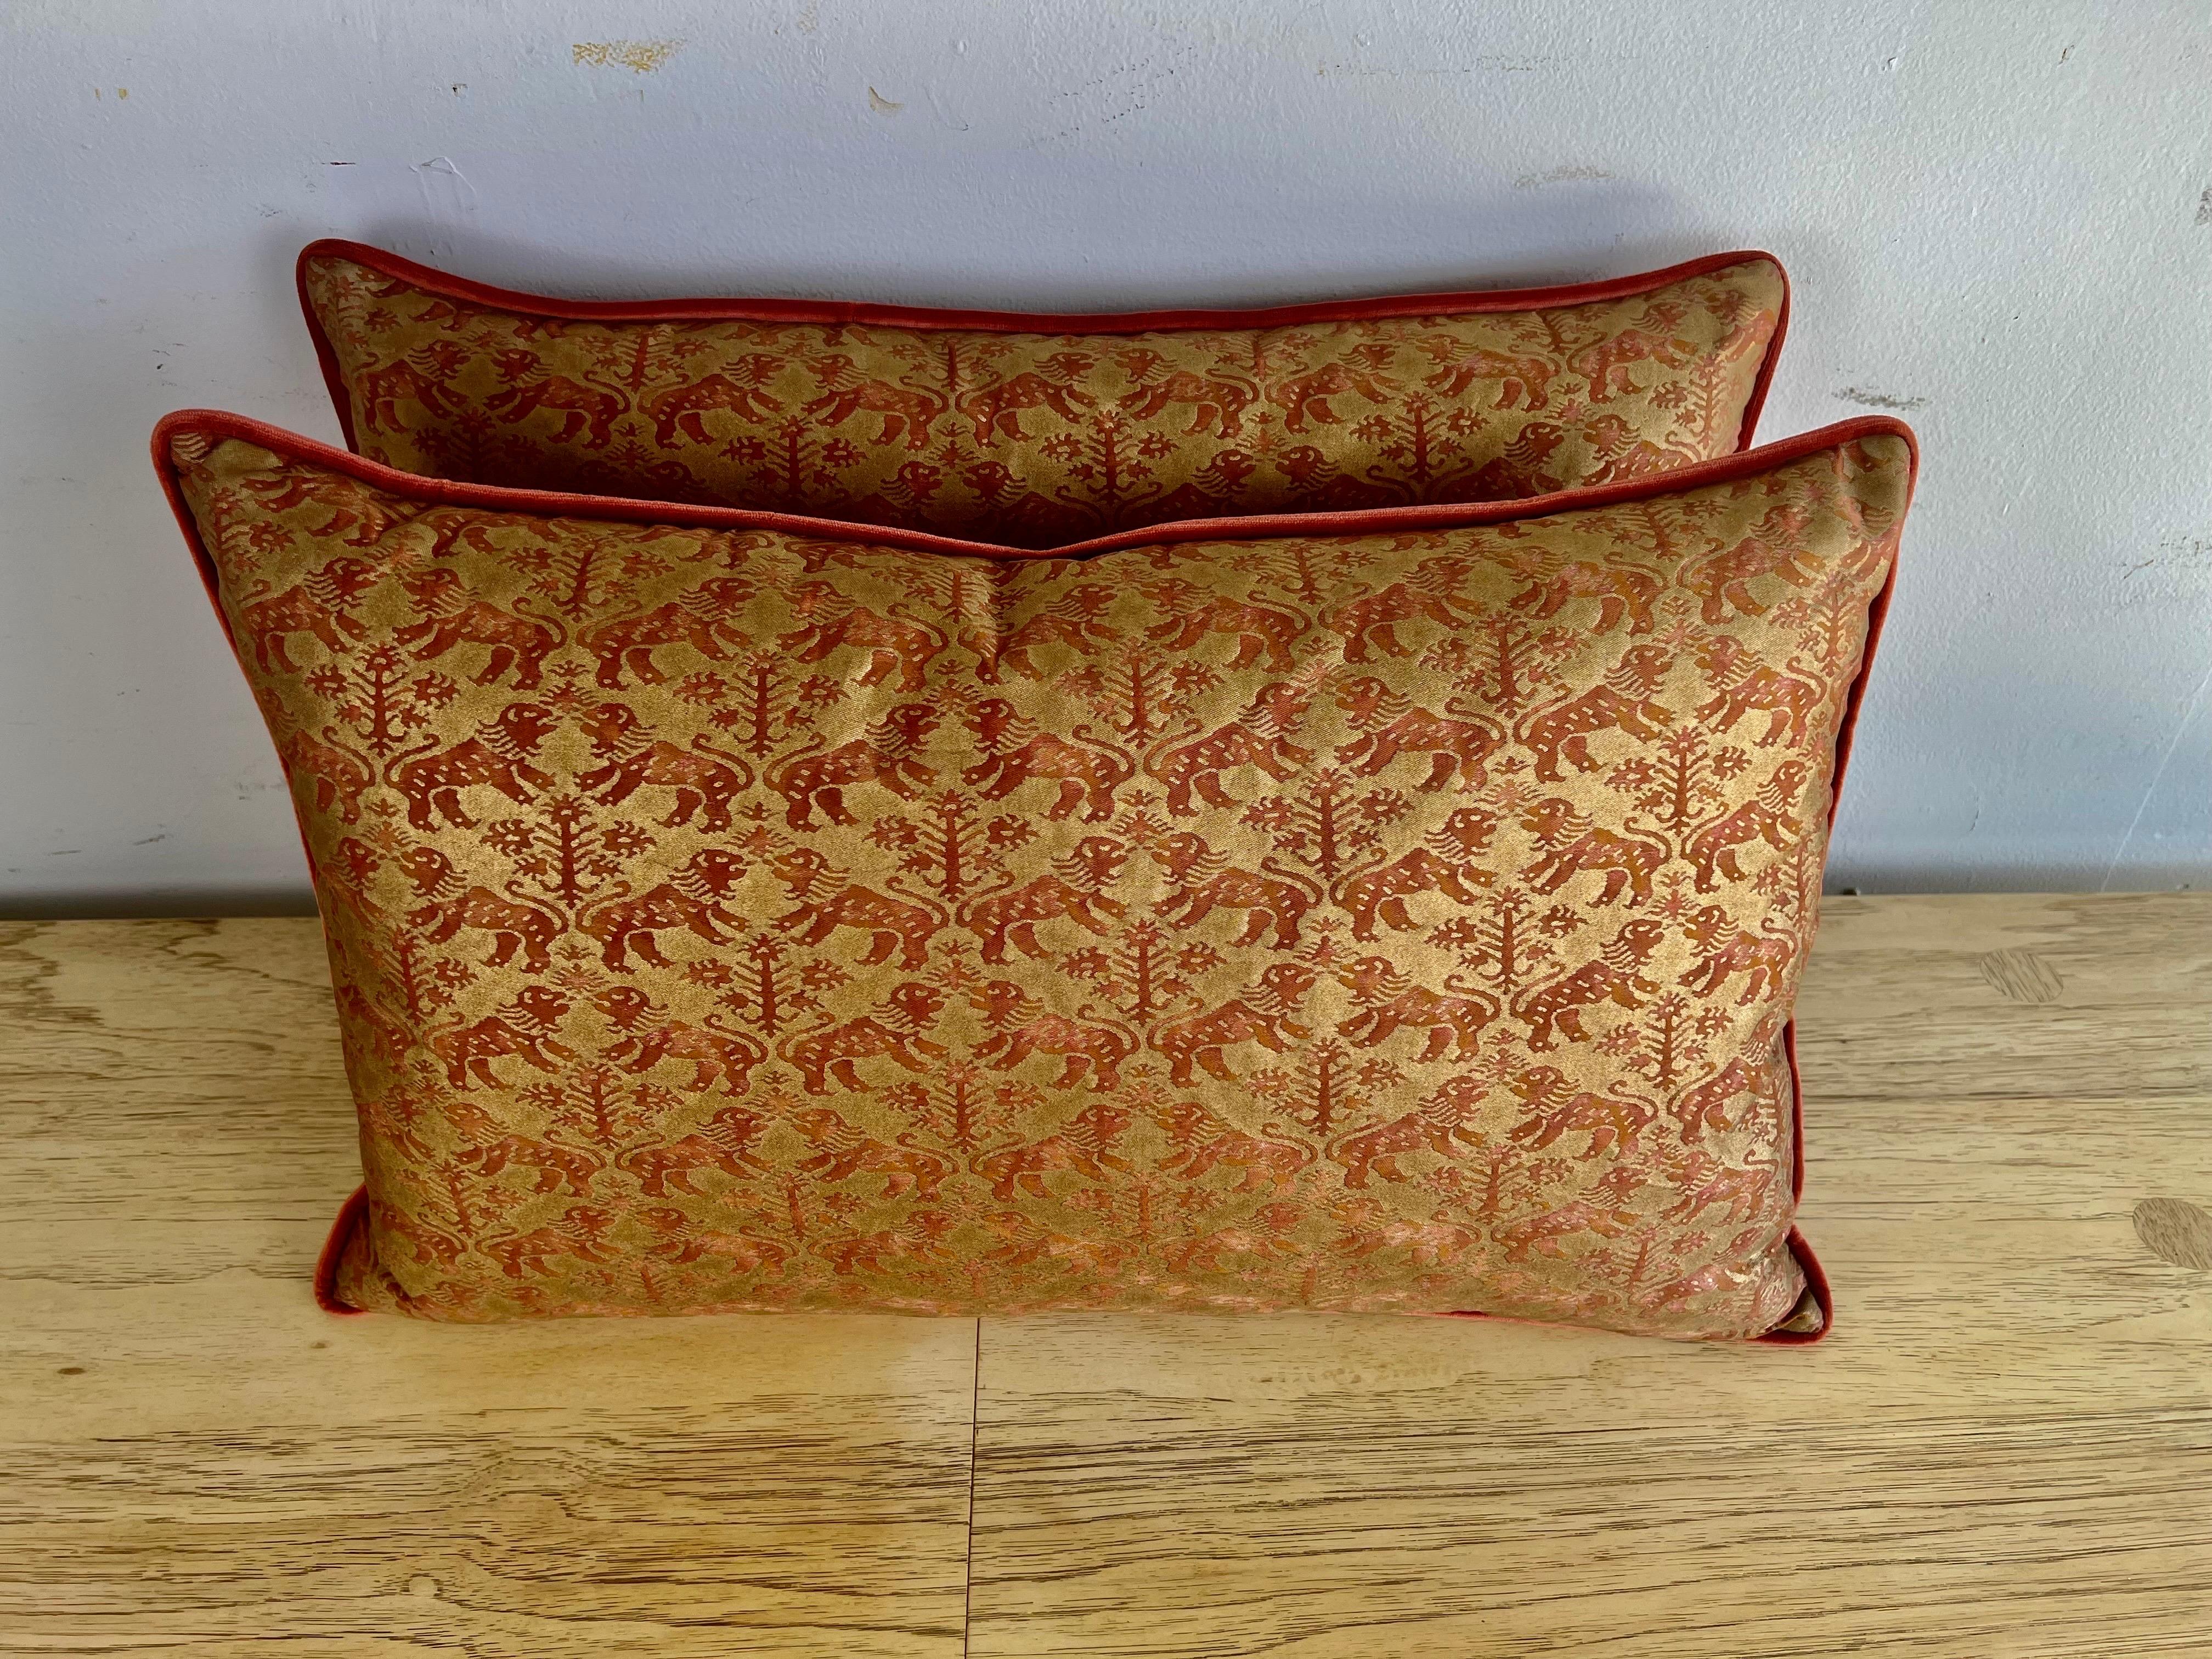 Pair of custom pillows made with vintage unused Fortuny stock in the Richeleau pattern in rust and metallic gold. Rust colored velvet backs with self cord detailing.  Down inserts, sewn closed.